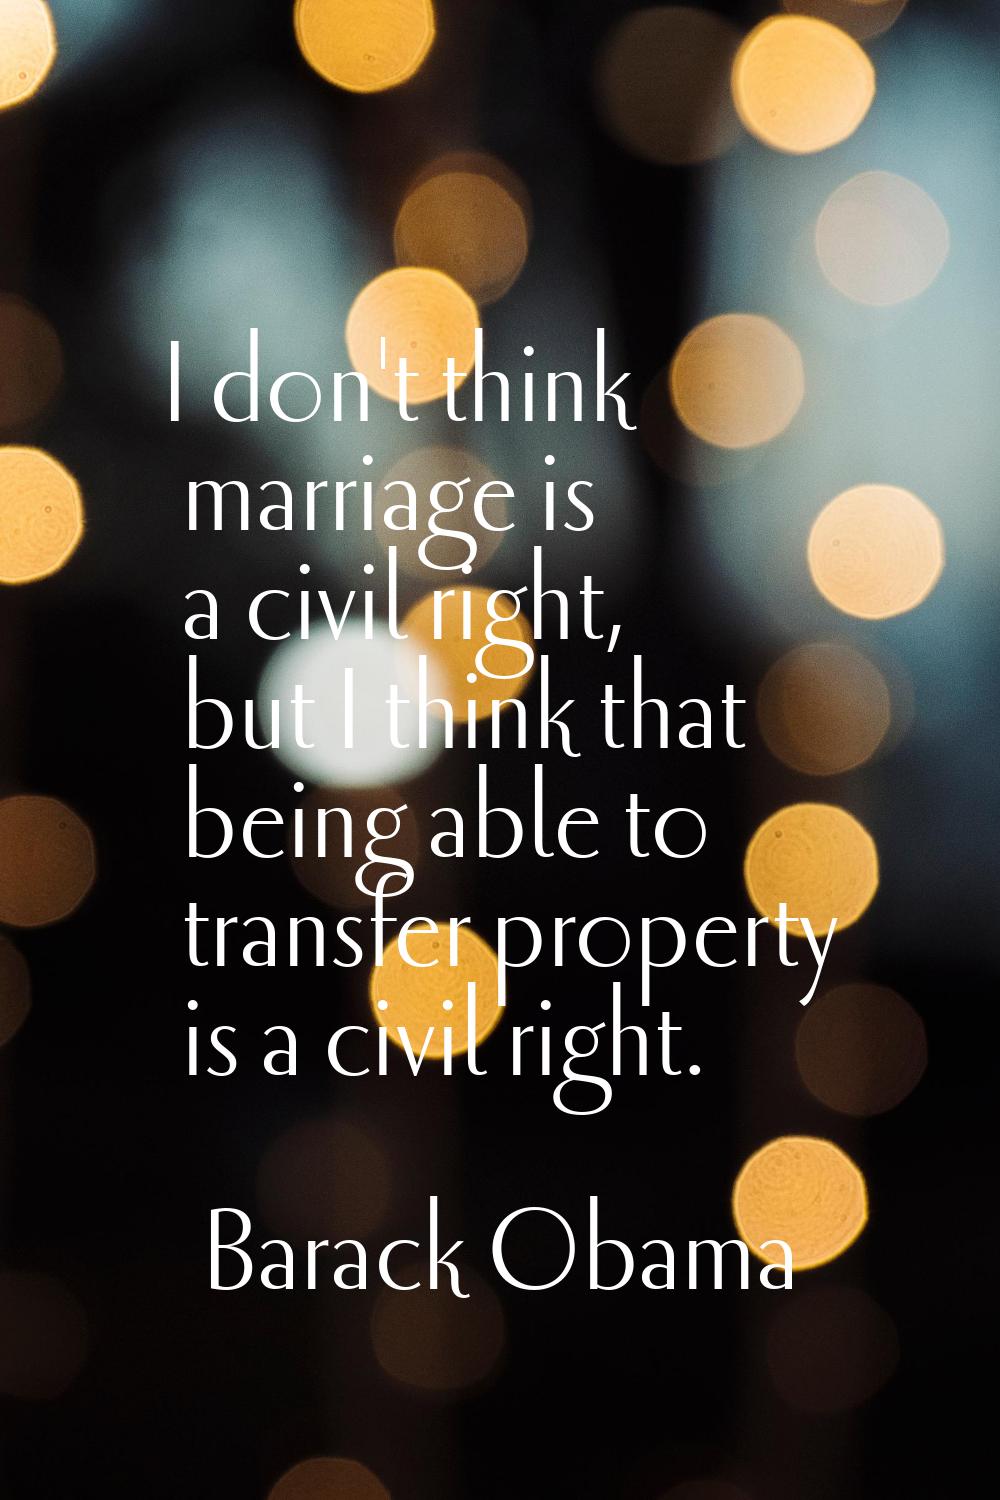 I don't think marriage is a civil right, but I think that being able to transfer property is a civi